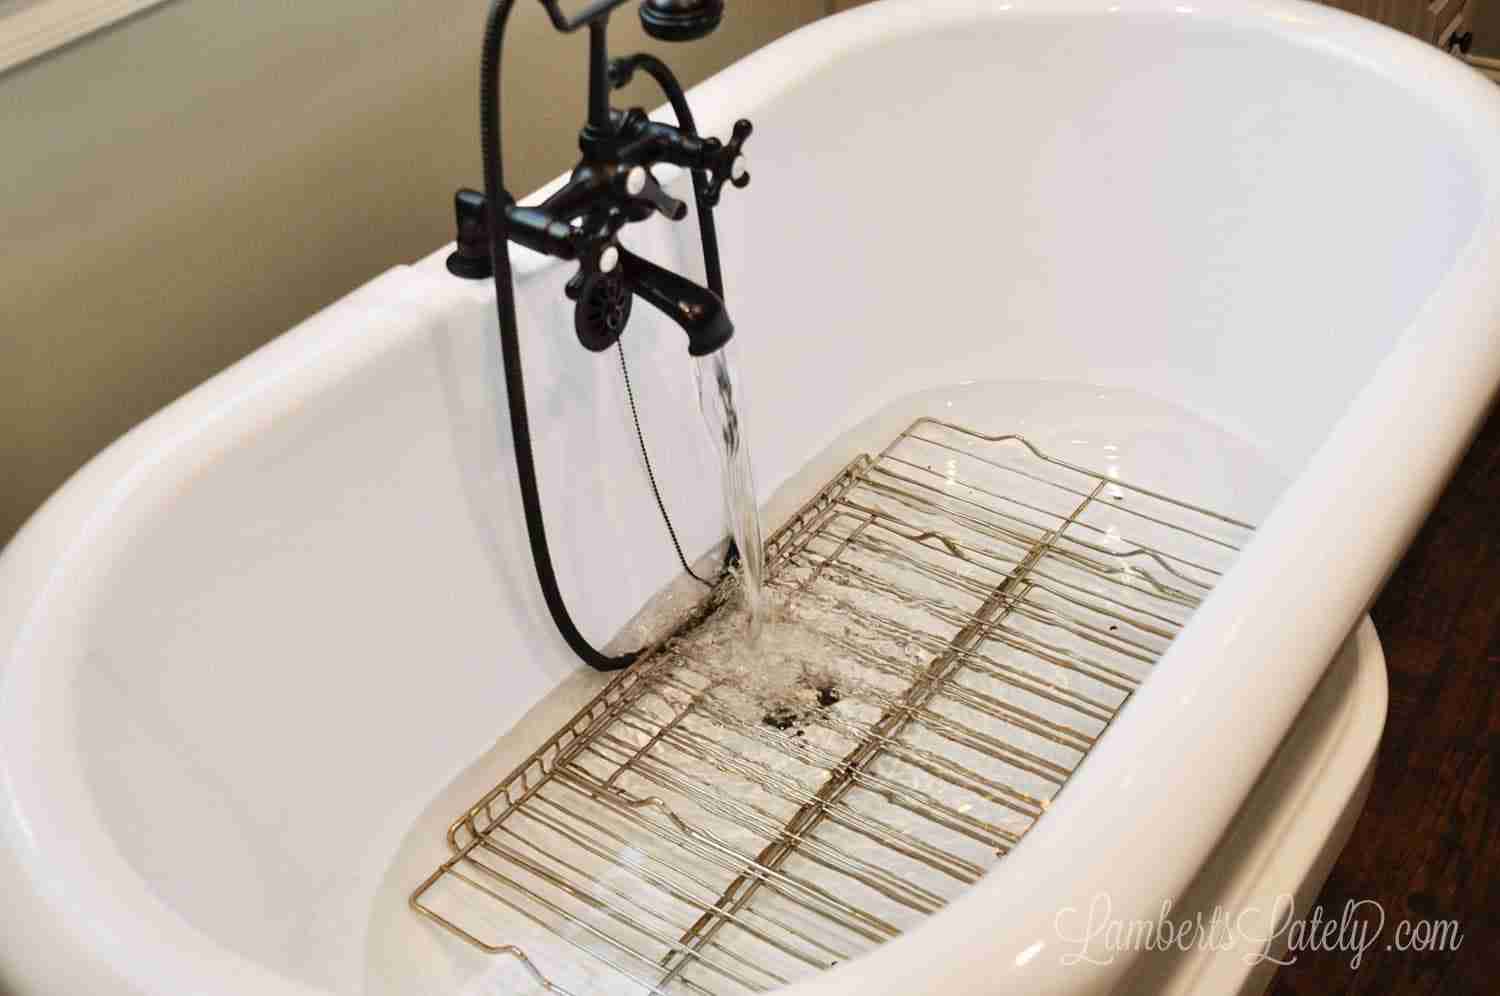 bathtub filling with water and oven racks